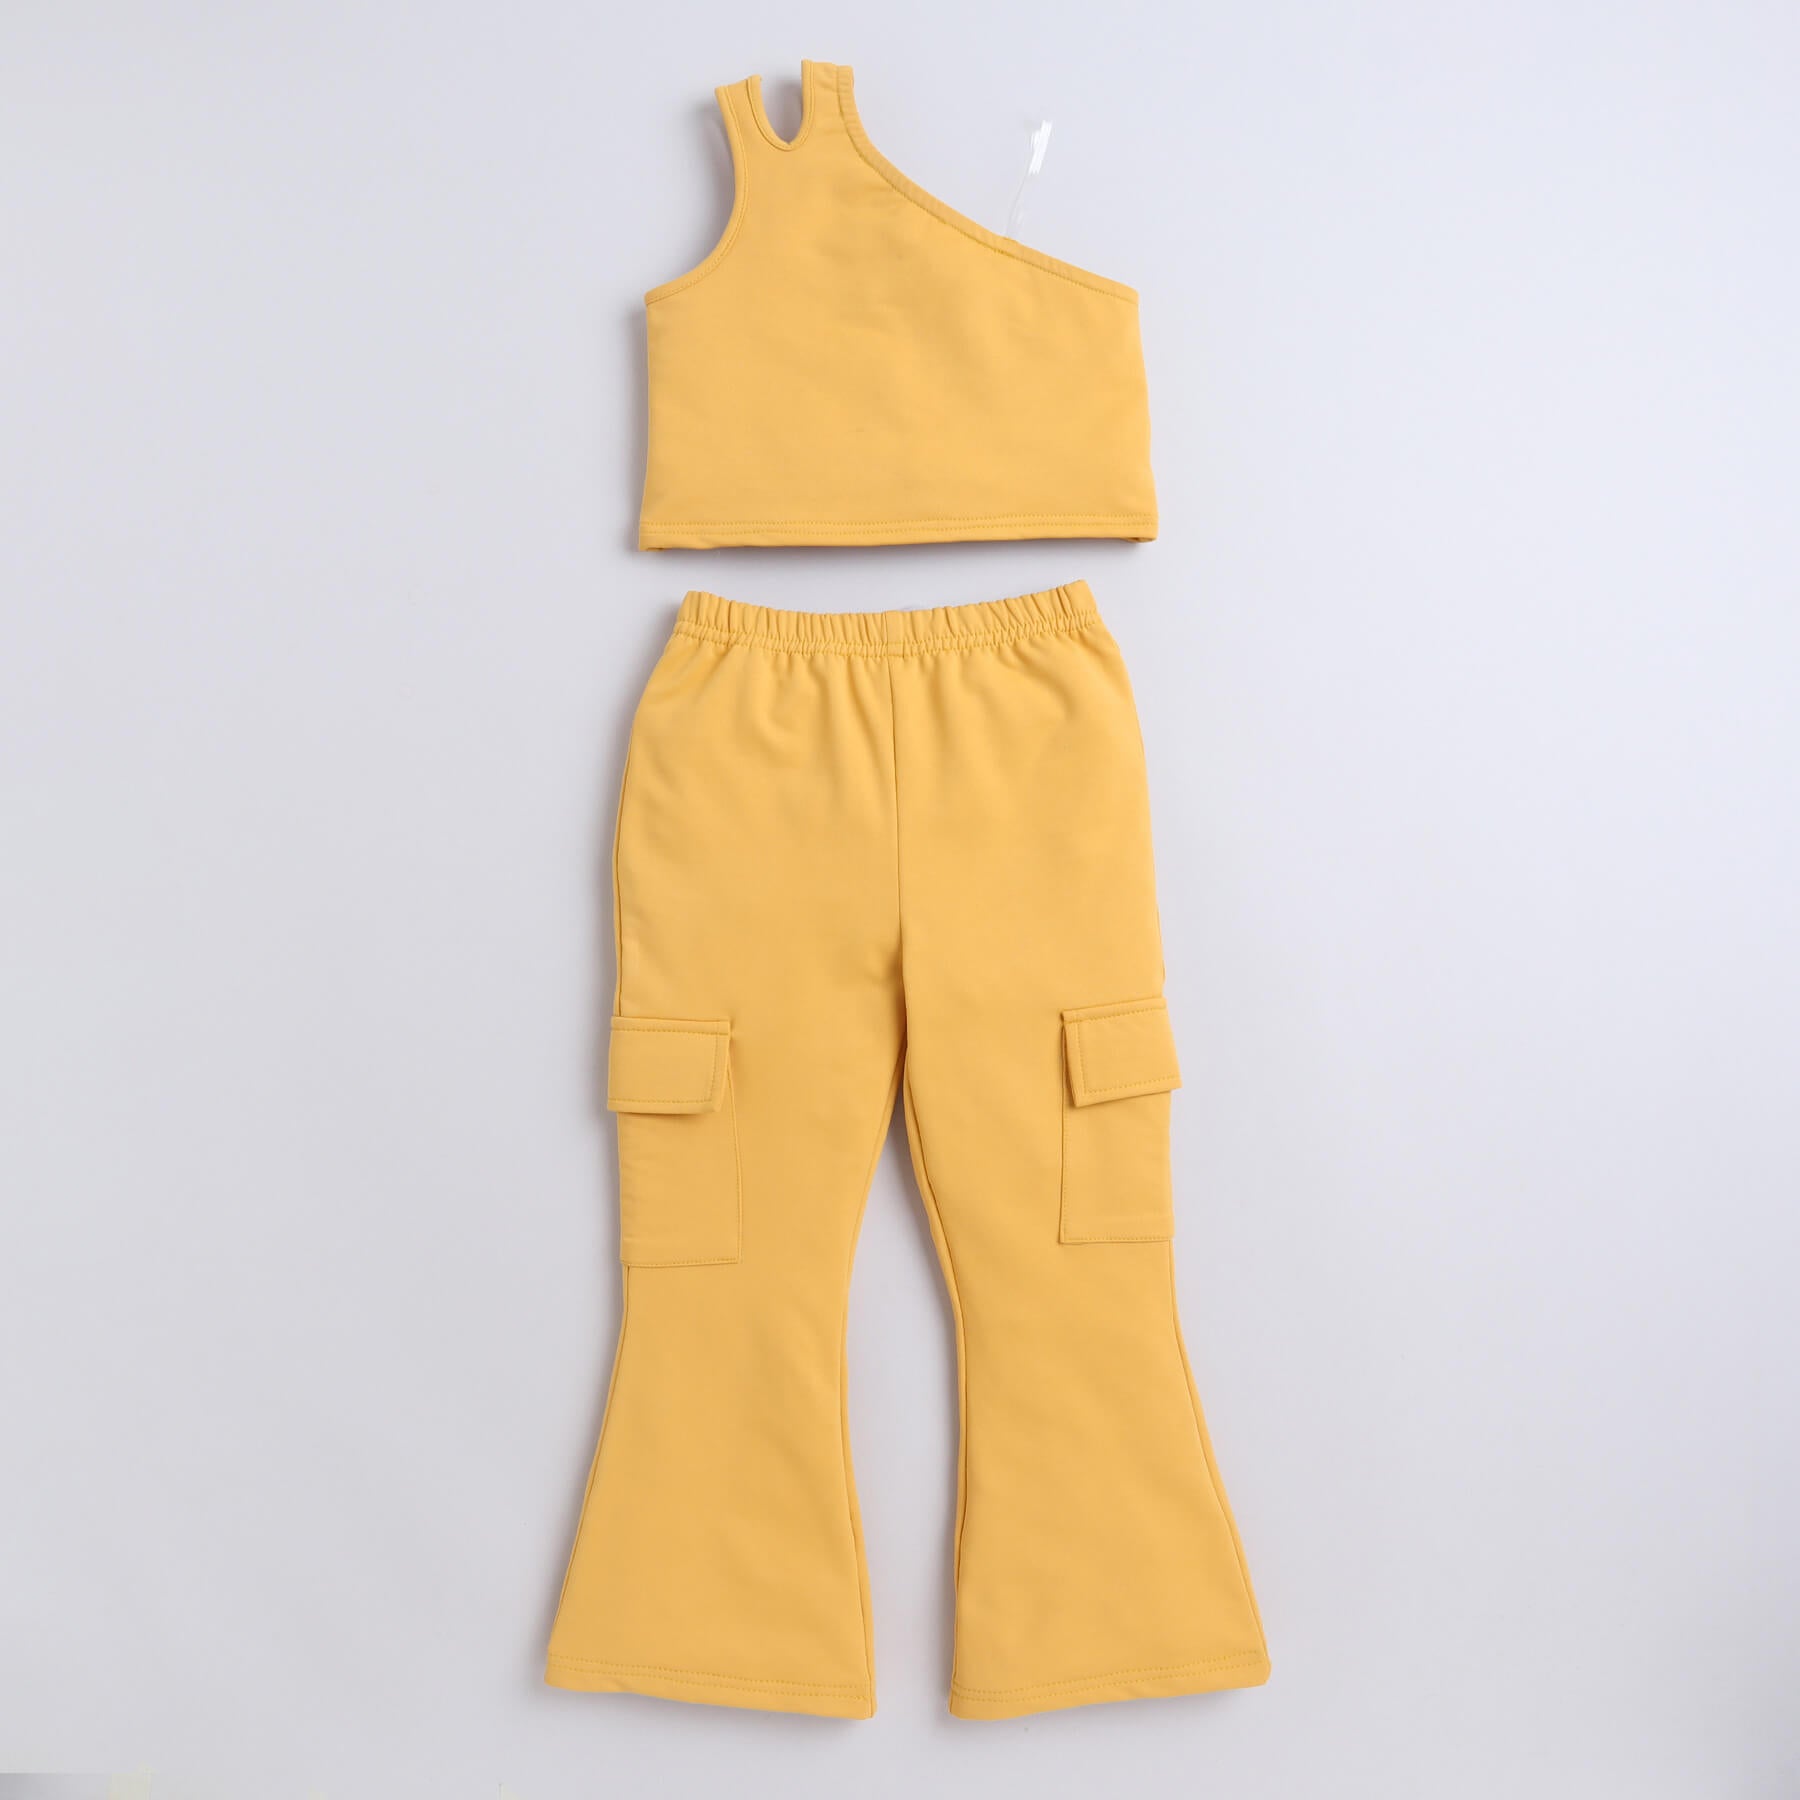 Taffykids one shoulder crop top and bell bottom pant set-Yellow